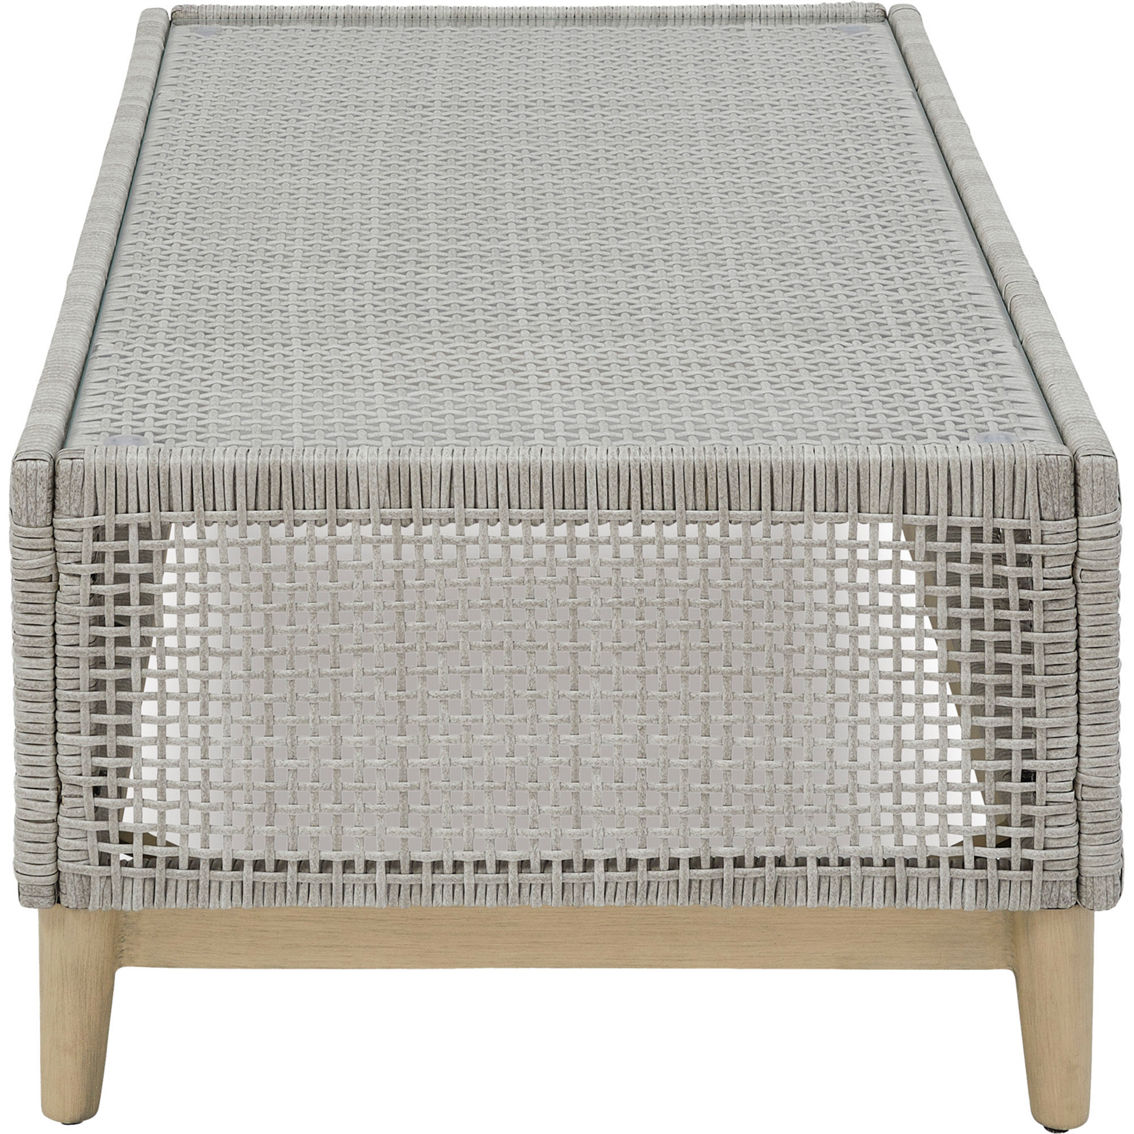 Signature Design by Ashley Seton Creek Outdoor Coffee Table - Image 2 of 6